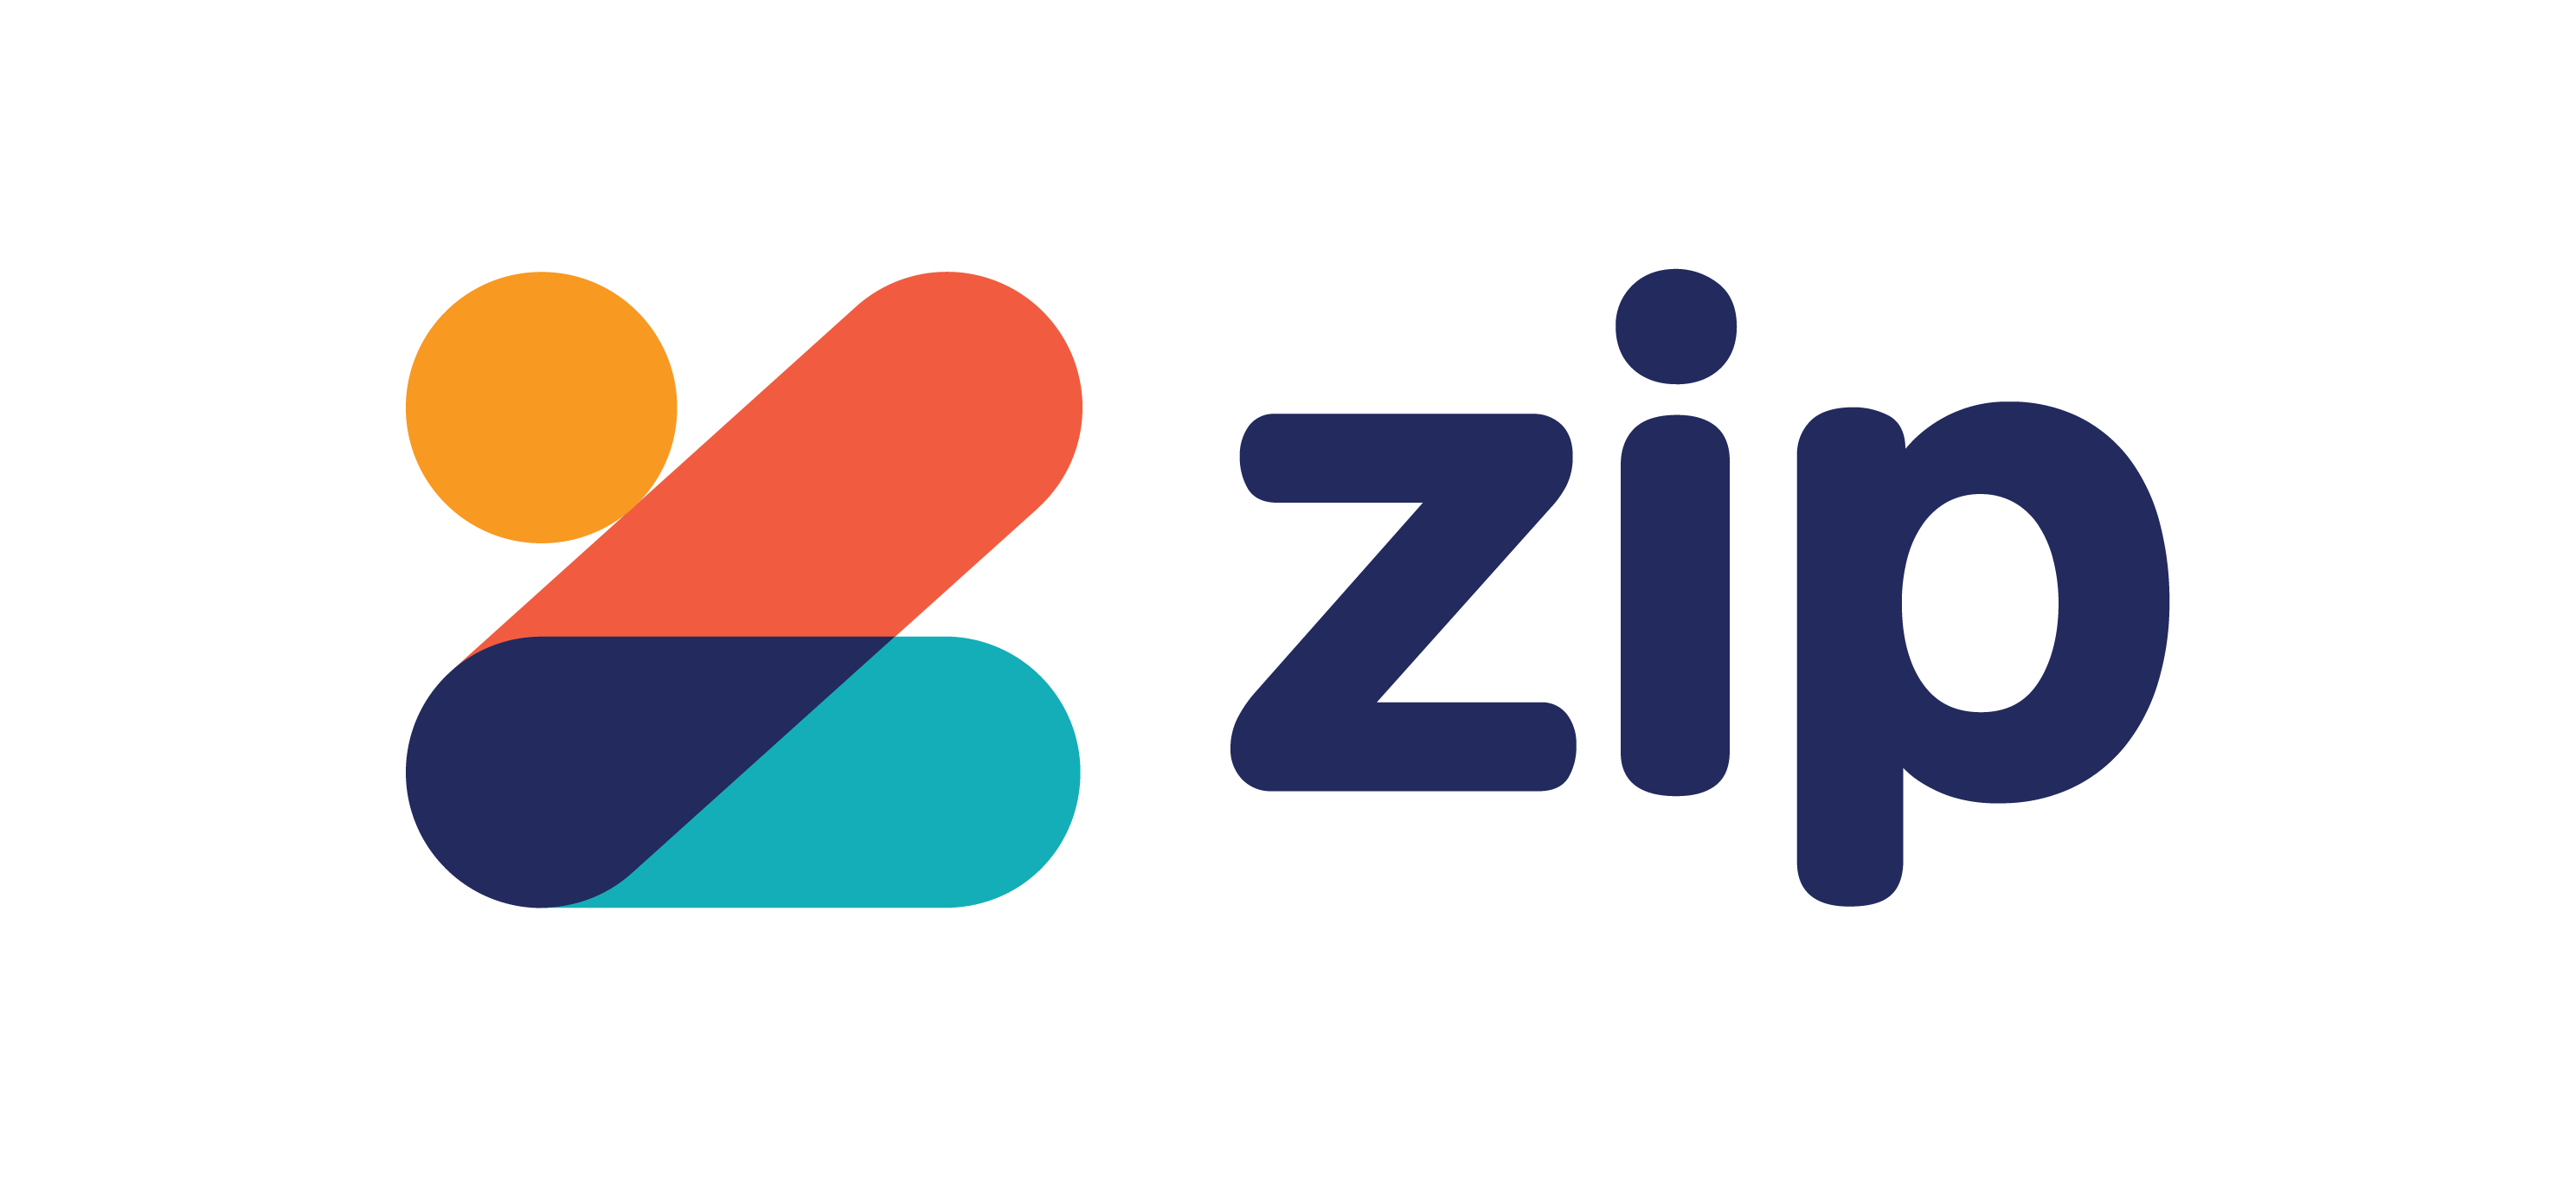 Fast and easy payments with Zippay